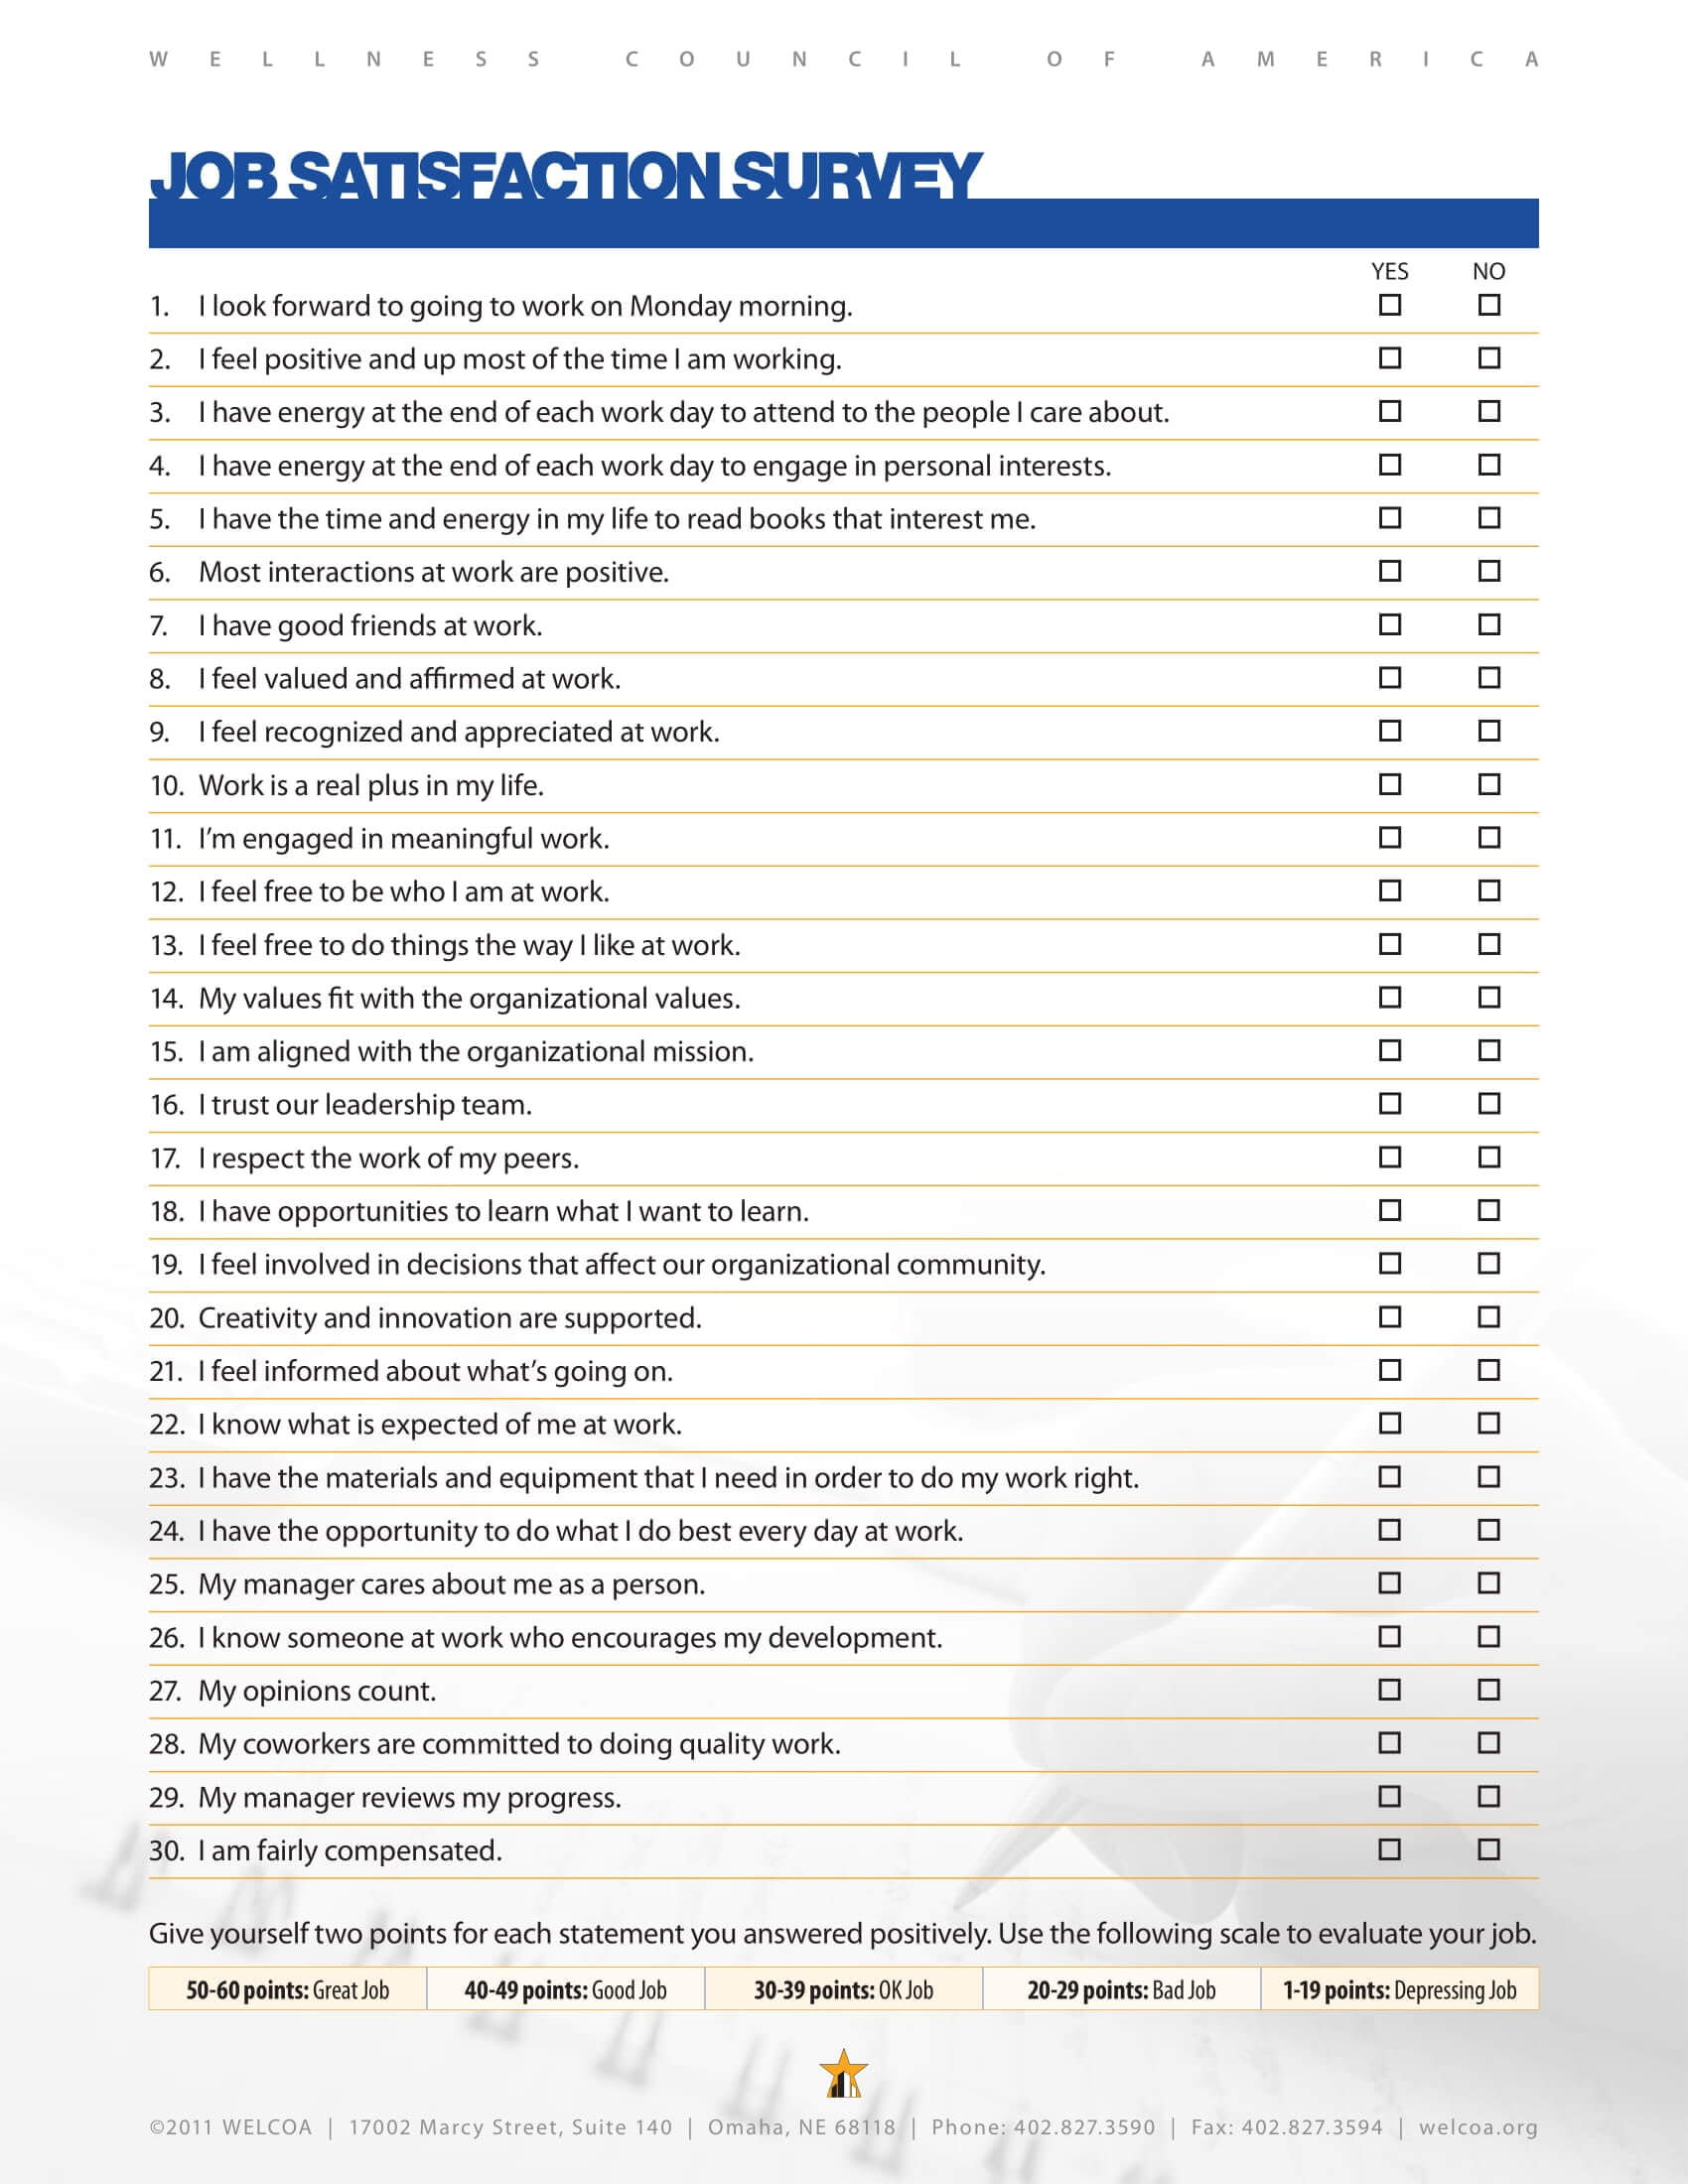 14+ Employee Satisfaction Survey Form Examples - Pdf, Doc Intended For Employee Satisfaction Survey Template Word